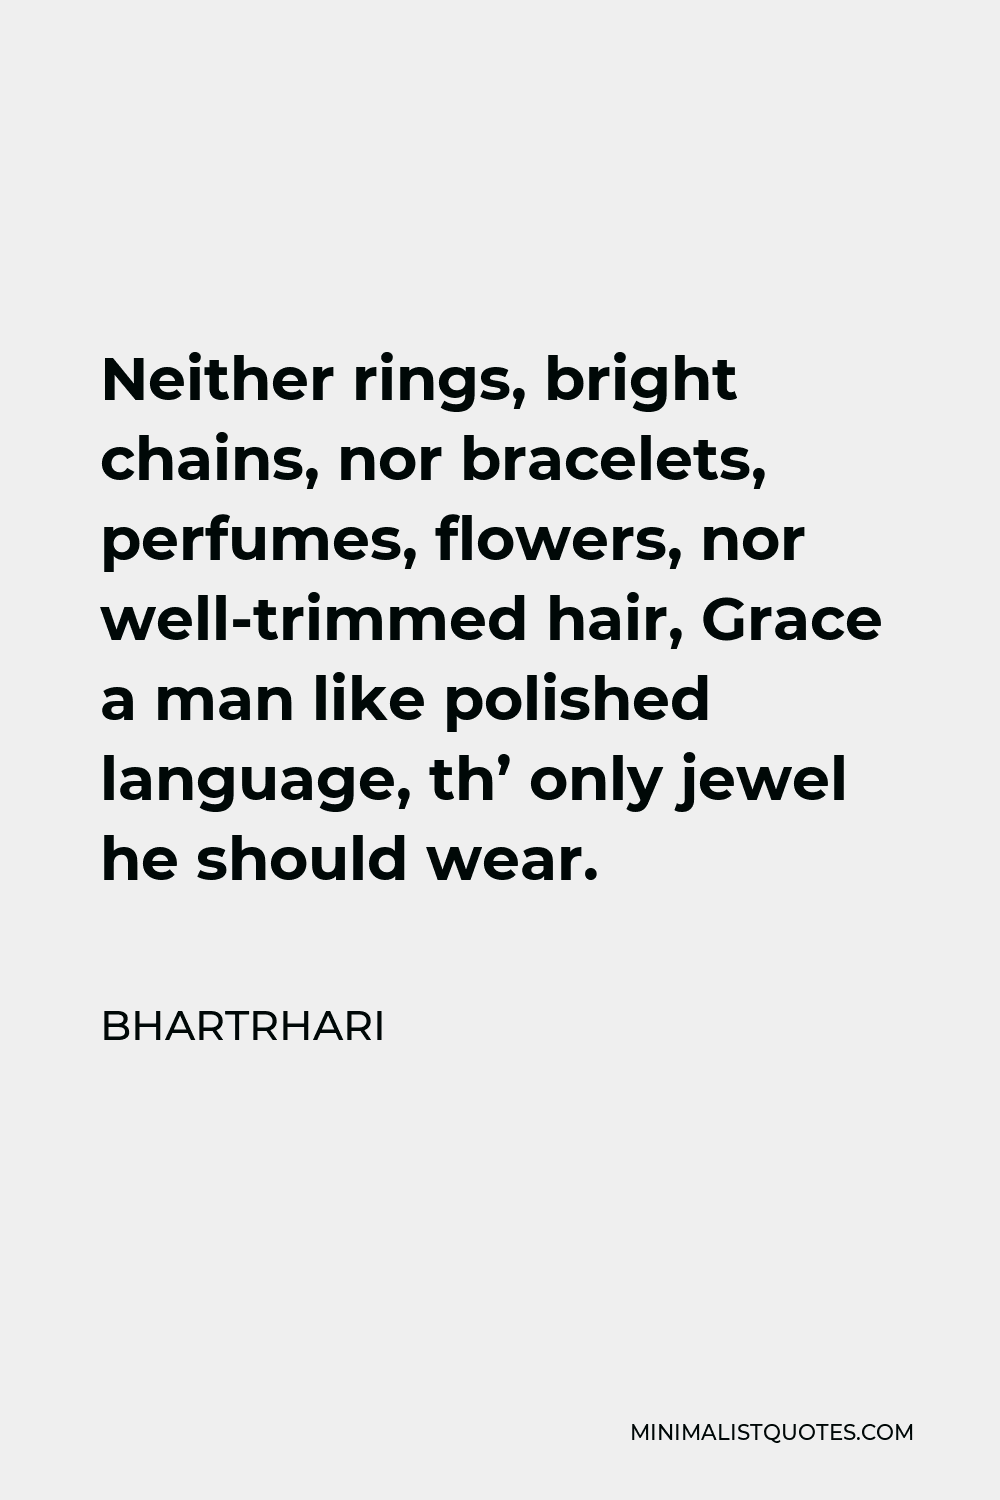 Bhartrhari Quote - Neither rings, bright chains, nor bracelets, perfumes, flowers, nor well-trimmed hair, Grace a man like polished language, th’ only jewel he should wear.